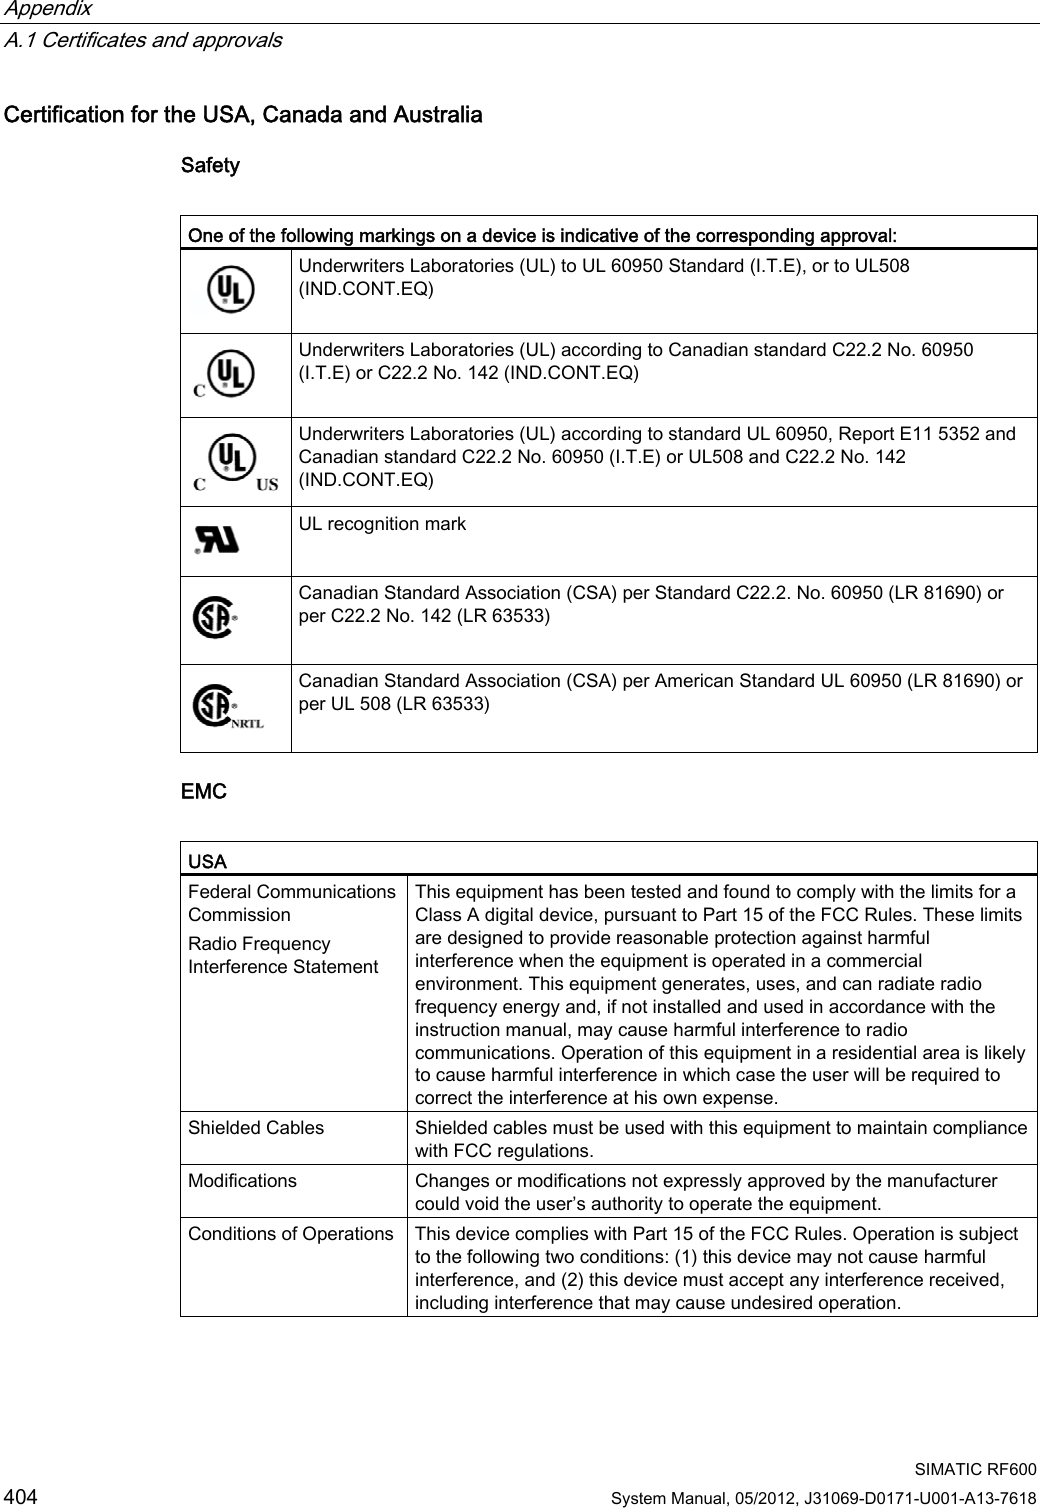 Appendix   A.1 Certificates and approvals  SIMATIC RF600 404 System Manual, 05/2012, J31069-D0171-U001-A13-7618 Certification for the USA, Canada and Australia Safety   One of the following markings on a device is indicative of the corresponding approval:  Underwriters Laboratories (UL) to UL 60950 Standard (I.T.E), or to UL508 (IND.CONT.EQ)  Underwriters Laboratories (UL) according to Canadian standard C22.2 No. 60950 (I.T.E) or C22.2 No. 142 (IND.CONT.EQ) Underwriters Laboratories (UL) according to standard UL 60950, Report E11 5352 and Canadian standard C22.2 No. 60950 (I.T.E) or UL508 and C22.2 No. 142 (IND.CONT.EQ)  UL recognition mark  Canadian Standard Association (CSA) per Standard C22.2. No. 60950 (LR 81690) or per C22.2 No. 142 (LR 63533)  Canadian Standard Association (CSA) per American Standard UL 60950 (LR 81690) or per UL 508 (LR 63533) EMC  USA Federal Communications Commission Radio Frequency Interference Statement This equipment has been tested and found to comply with the limits for a Class A digital device, pursuant to Part 15 of the FCC Rules. These limits are designed to provide reasonable protection against harmful interference when the equipment is operated in a commercial environment. This equipment generates, uses, and can radiate radio frequency energy and, if not installed and used in accordance with the instruction manual, may cause harmful interference to radio communications. Operation of this equipment in a residential area is likely to cause harmful interference in which case the user will be required to correct the interference at his own expense.  Shielded Cables  Shielded cables must be used with this equipment to maintain compliance with FCC regulations. Modifications  Changes or modifications not expressly approved by the manufacturer could void the user’s authority to operate the equipment. Conditions of Operations  This device complies with Part 15 of the FCC Rules. Operation is subject to the following two conditions: (1) this device may not cause harmful interference, and (2) this device must accept any interference received, including interference that may cause undesired operation.  